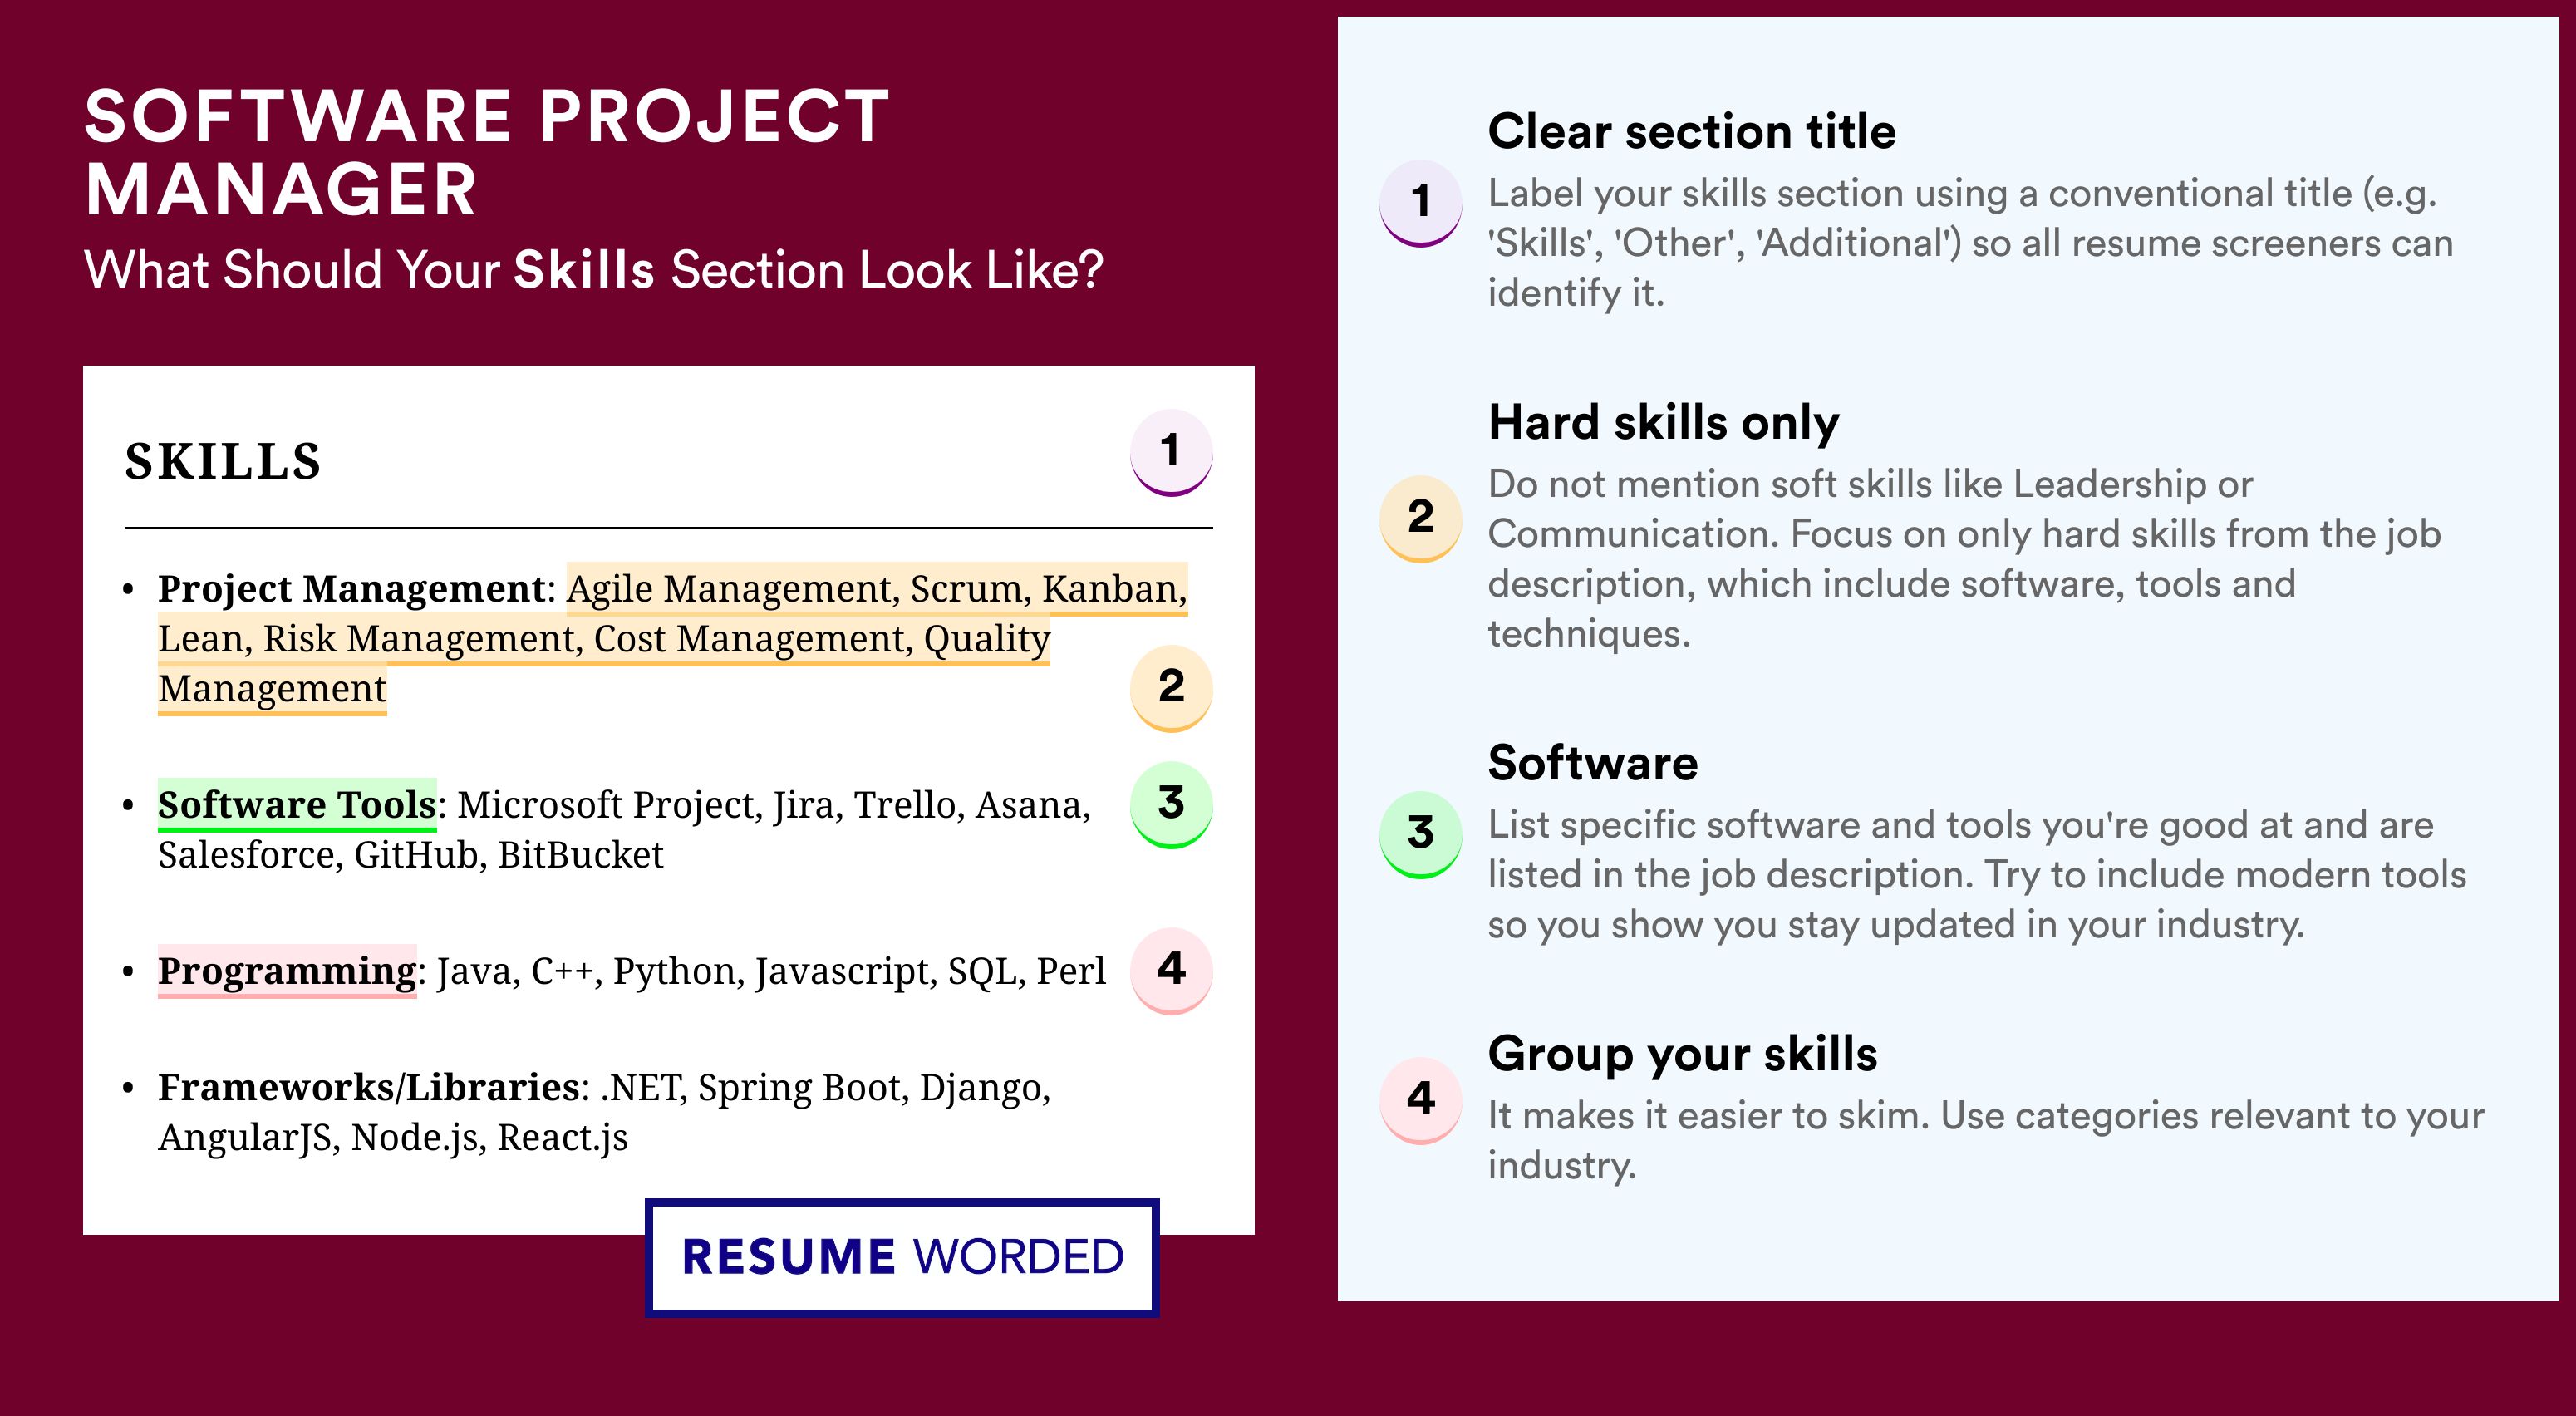 How To Write Your Skills Section - Software Project Manager Roles